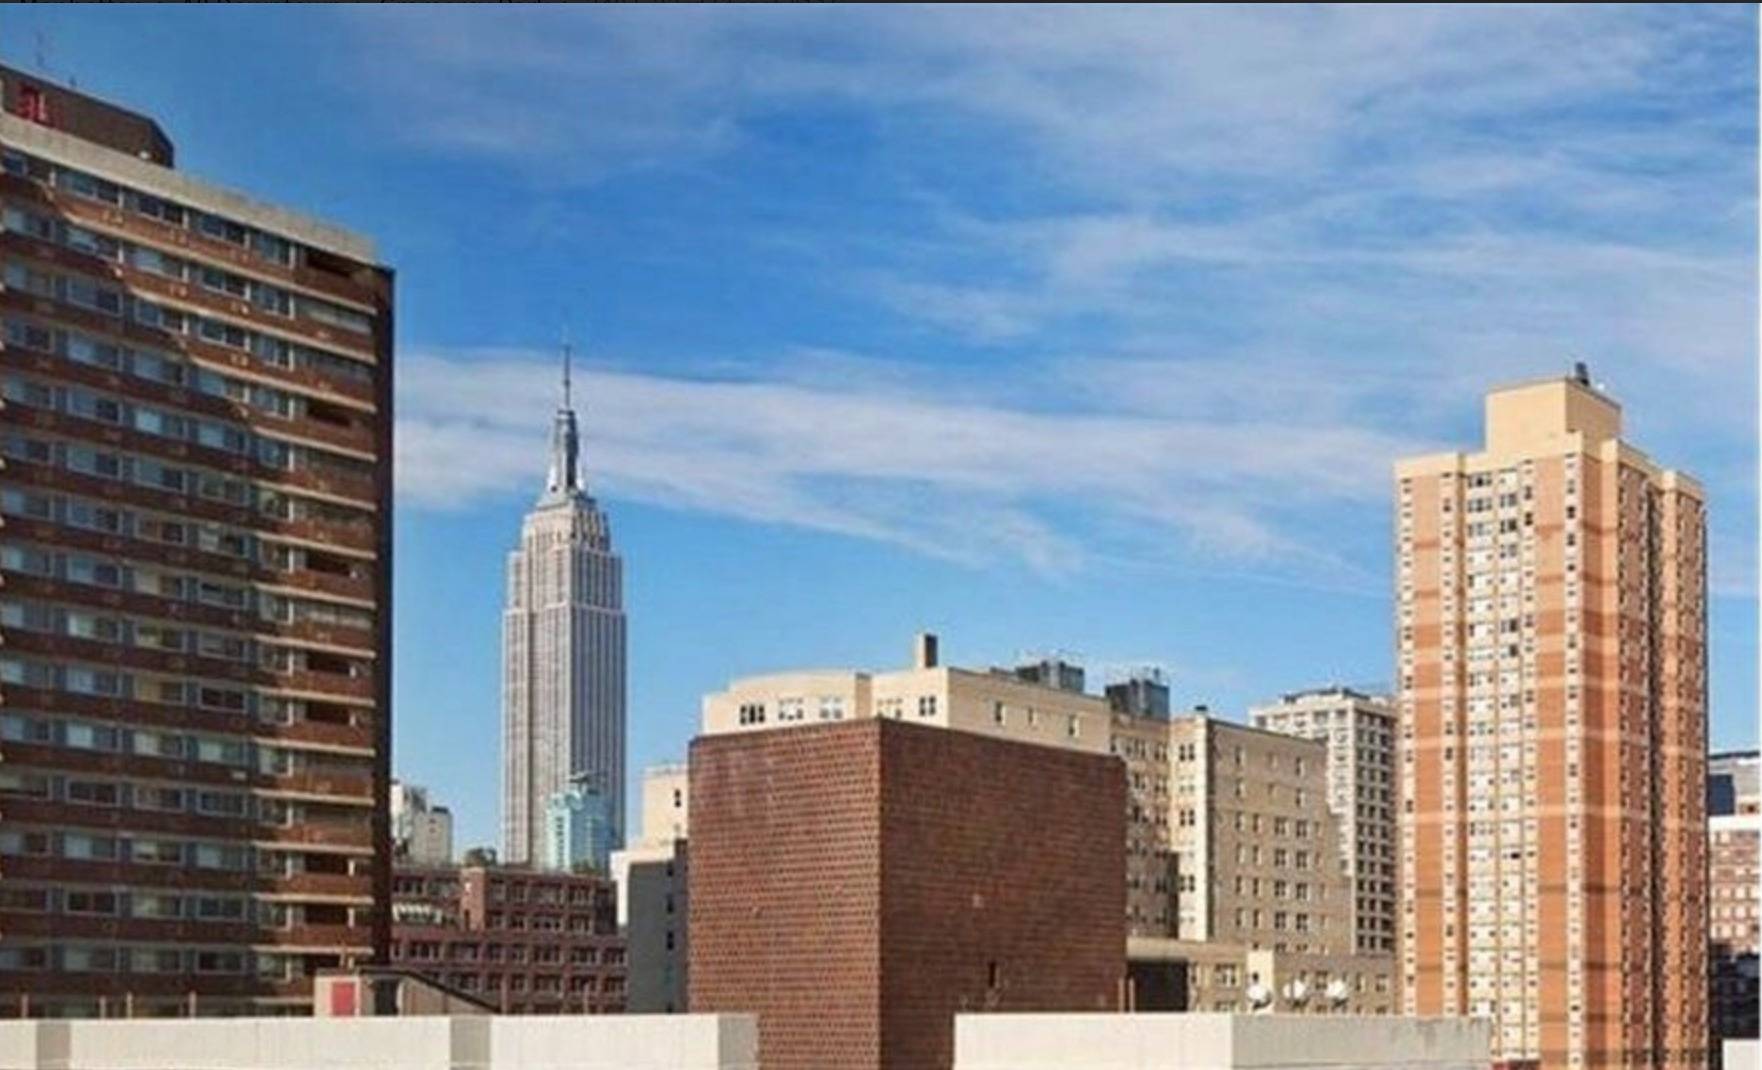 NO FEE ! Stunning studio designed by famous designer and architect, Philippe Starck features floor to ceiling windows with Empire State views !